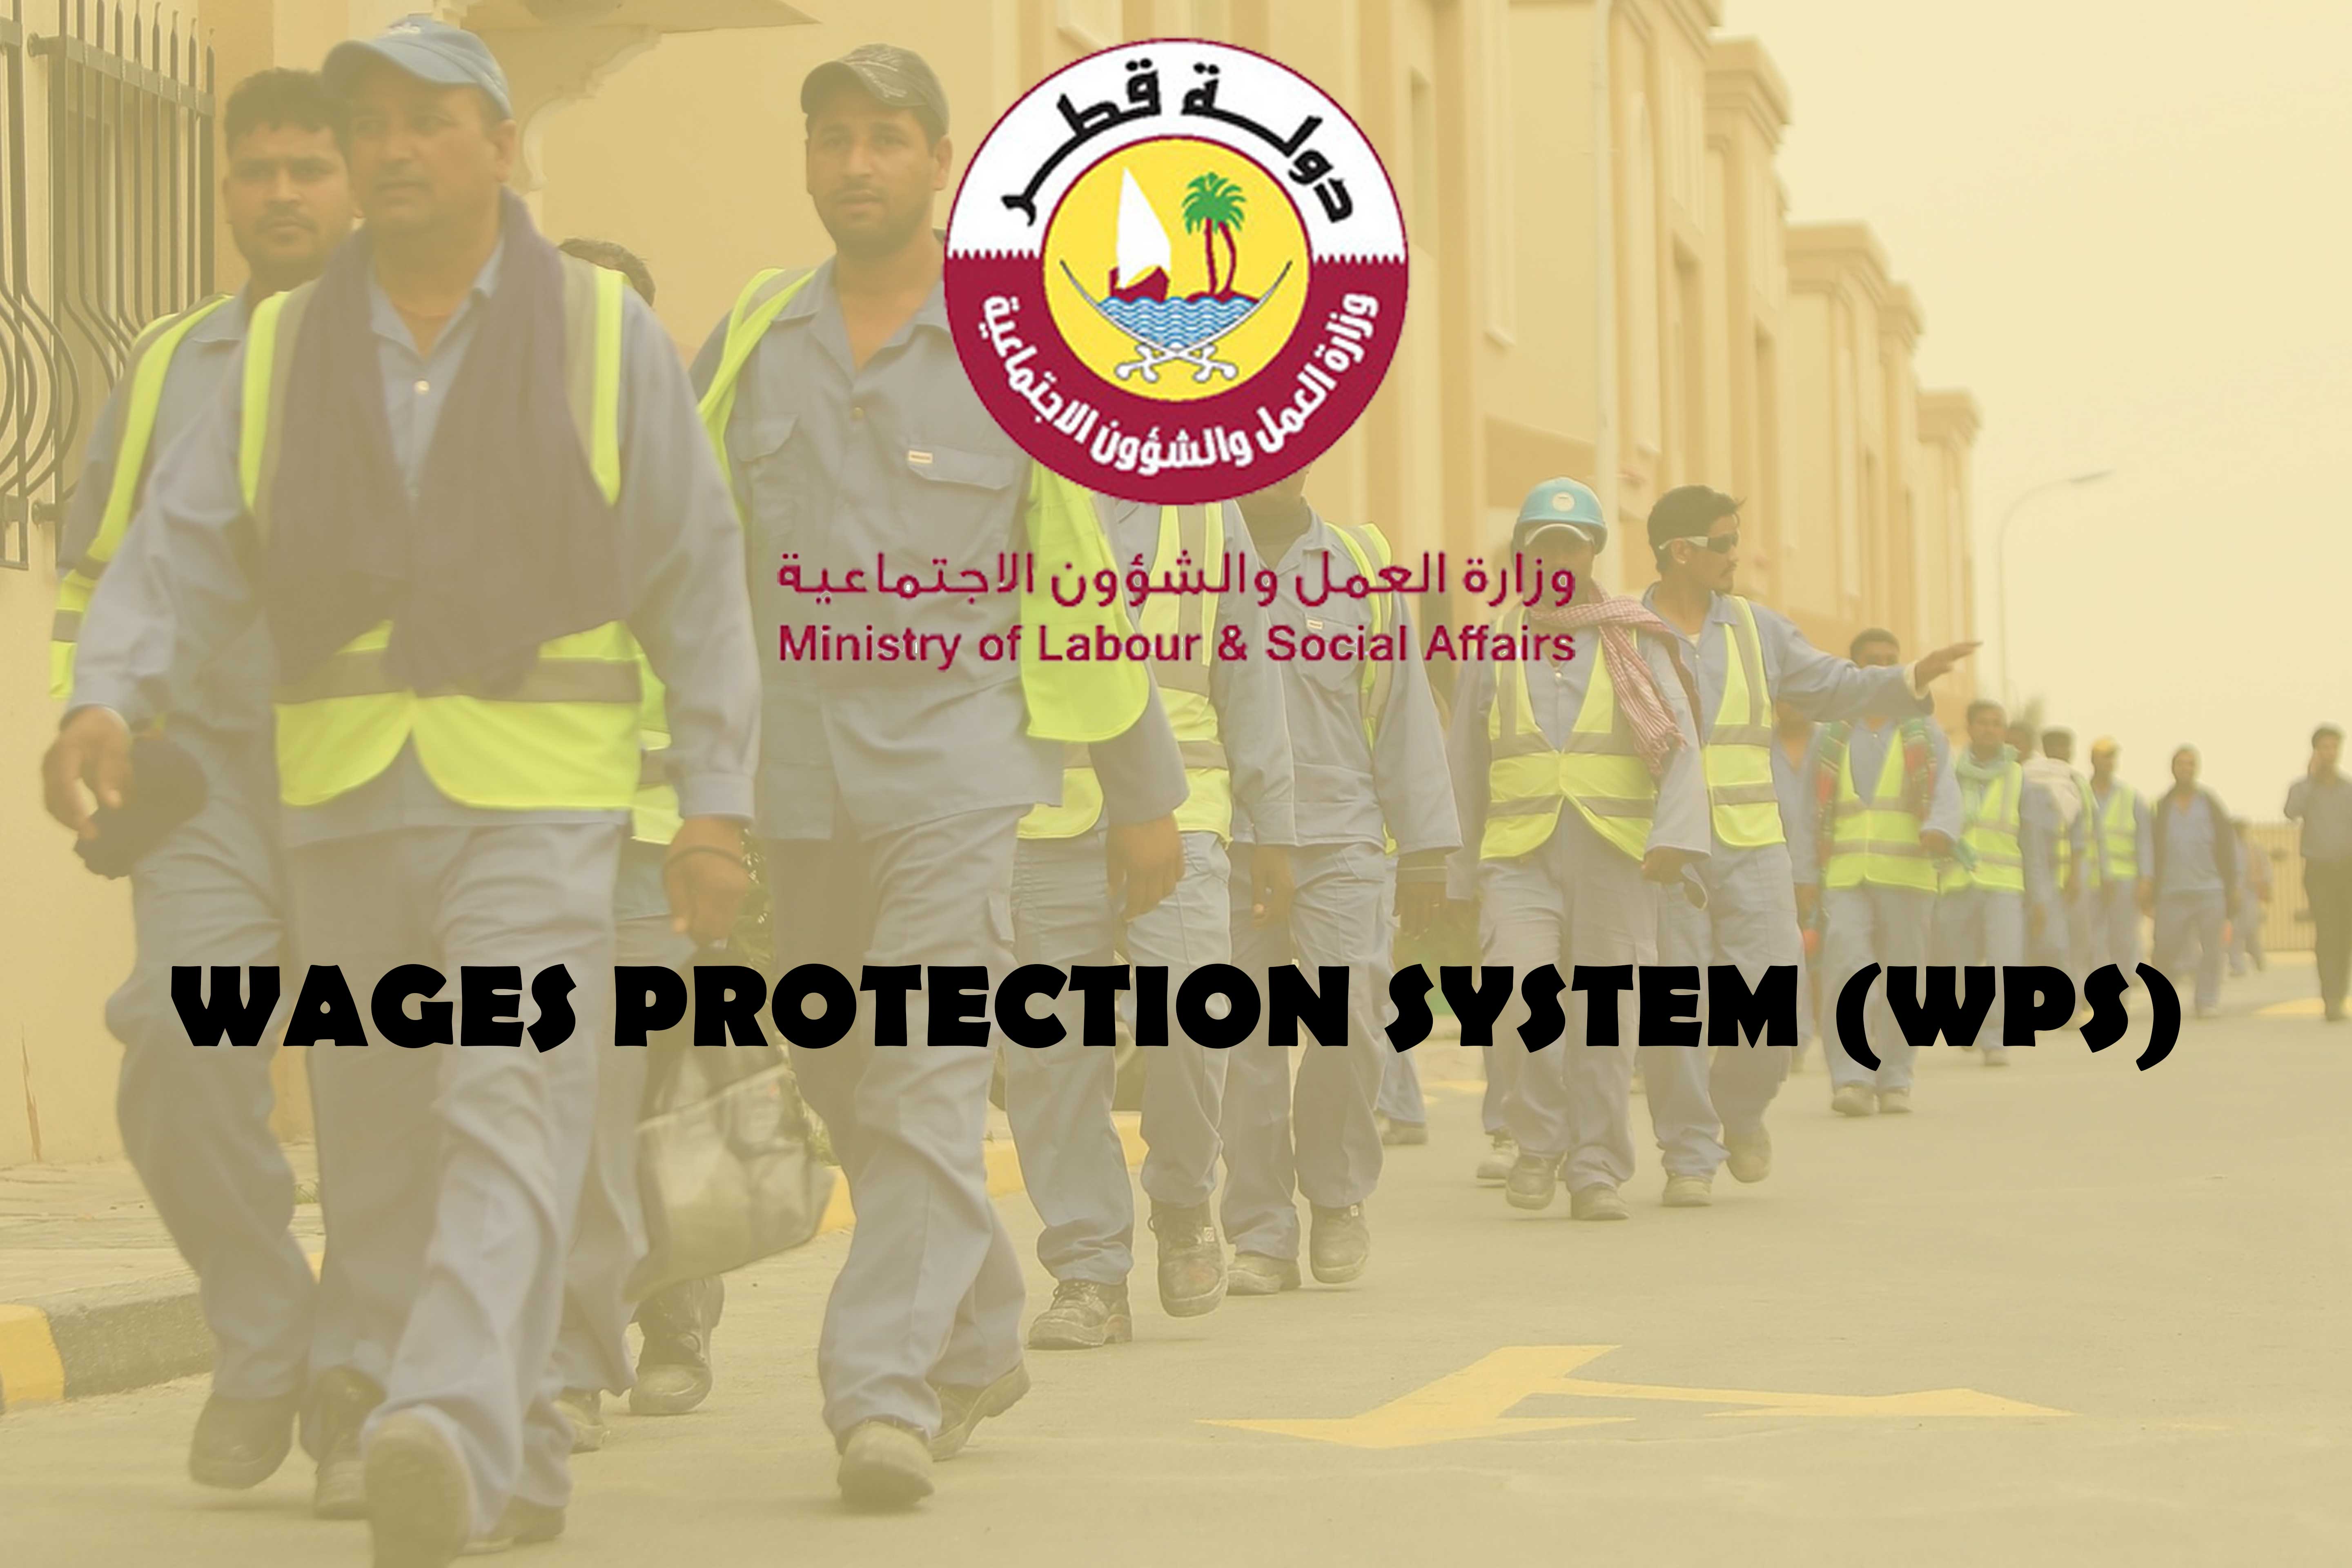 Wages Protection System (WPS)